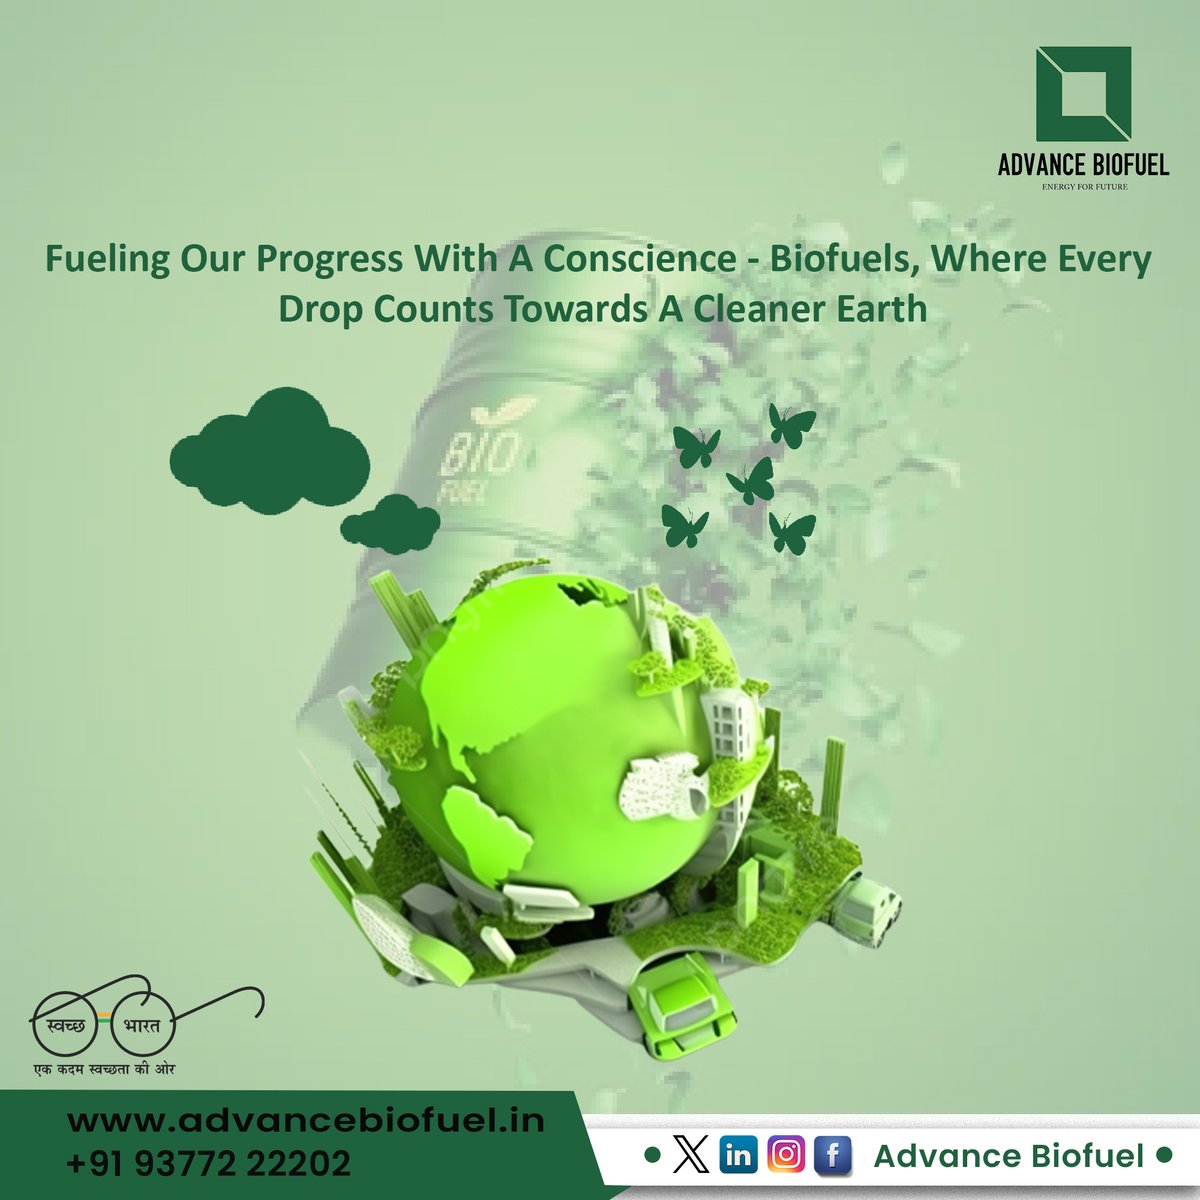 Fueling our progress with a conscience - biofuels, where every drop counts towards a cleaner Earth

#Advancebiofuel  #CleanEnergyRevolution #SustainableFuels #Biofuel #GreenTechInnovation #ecofriendly